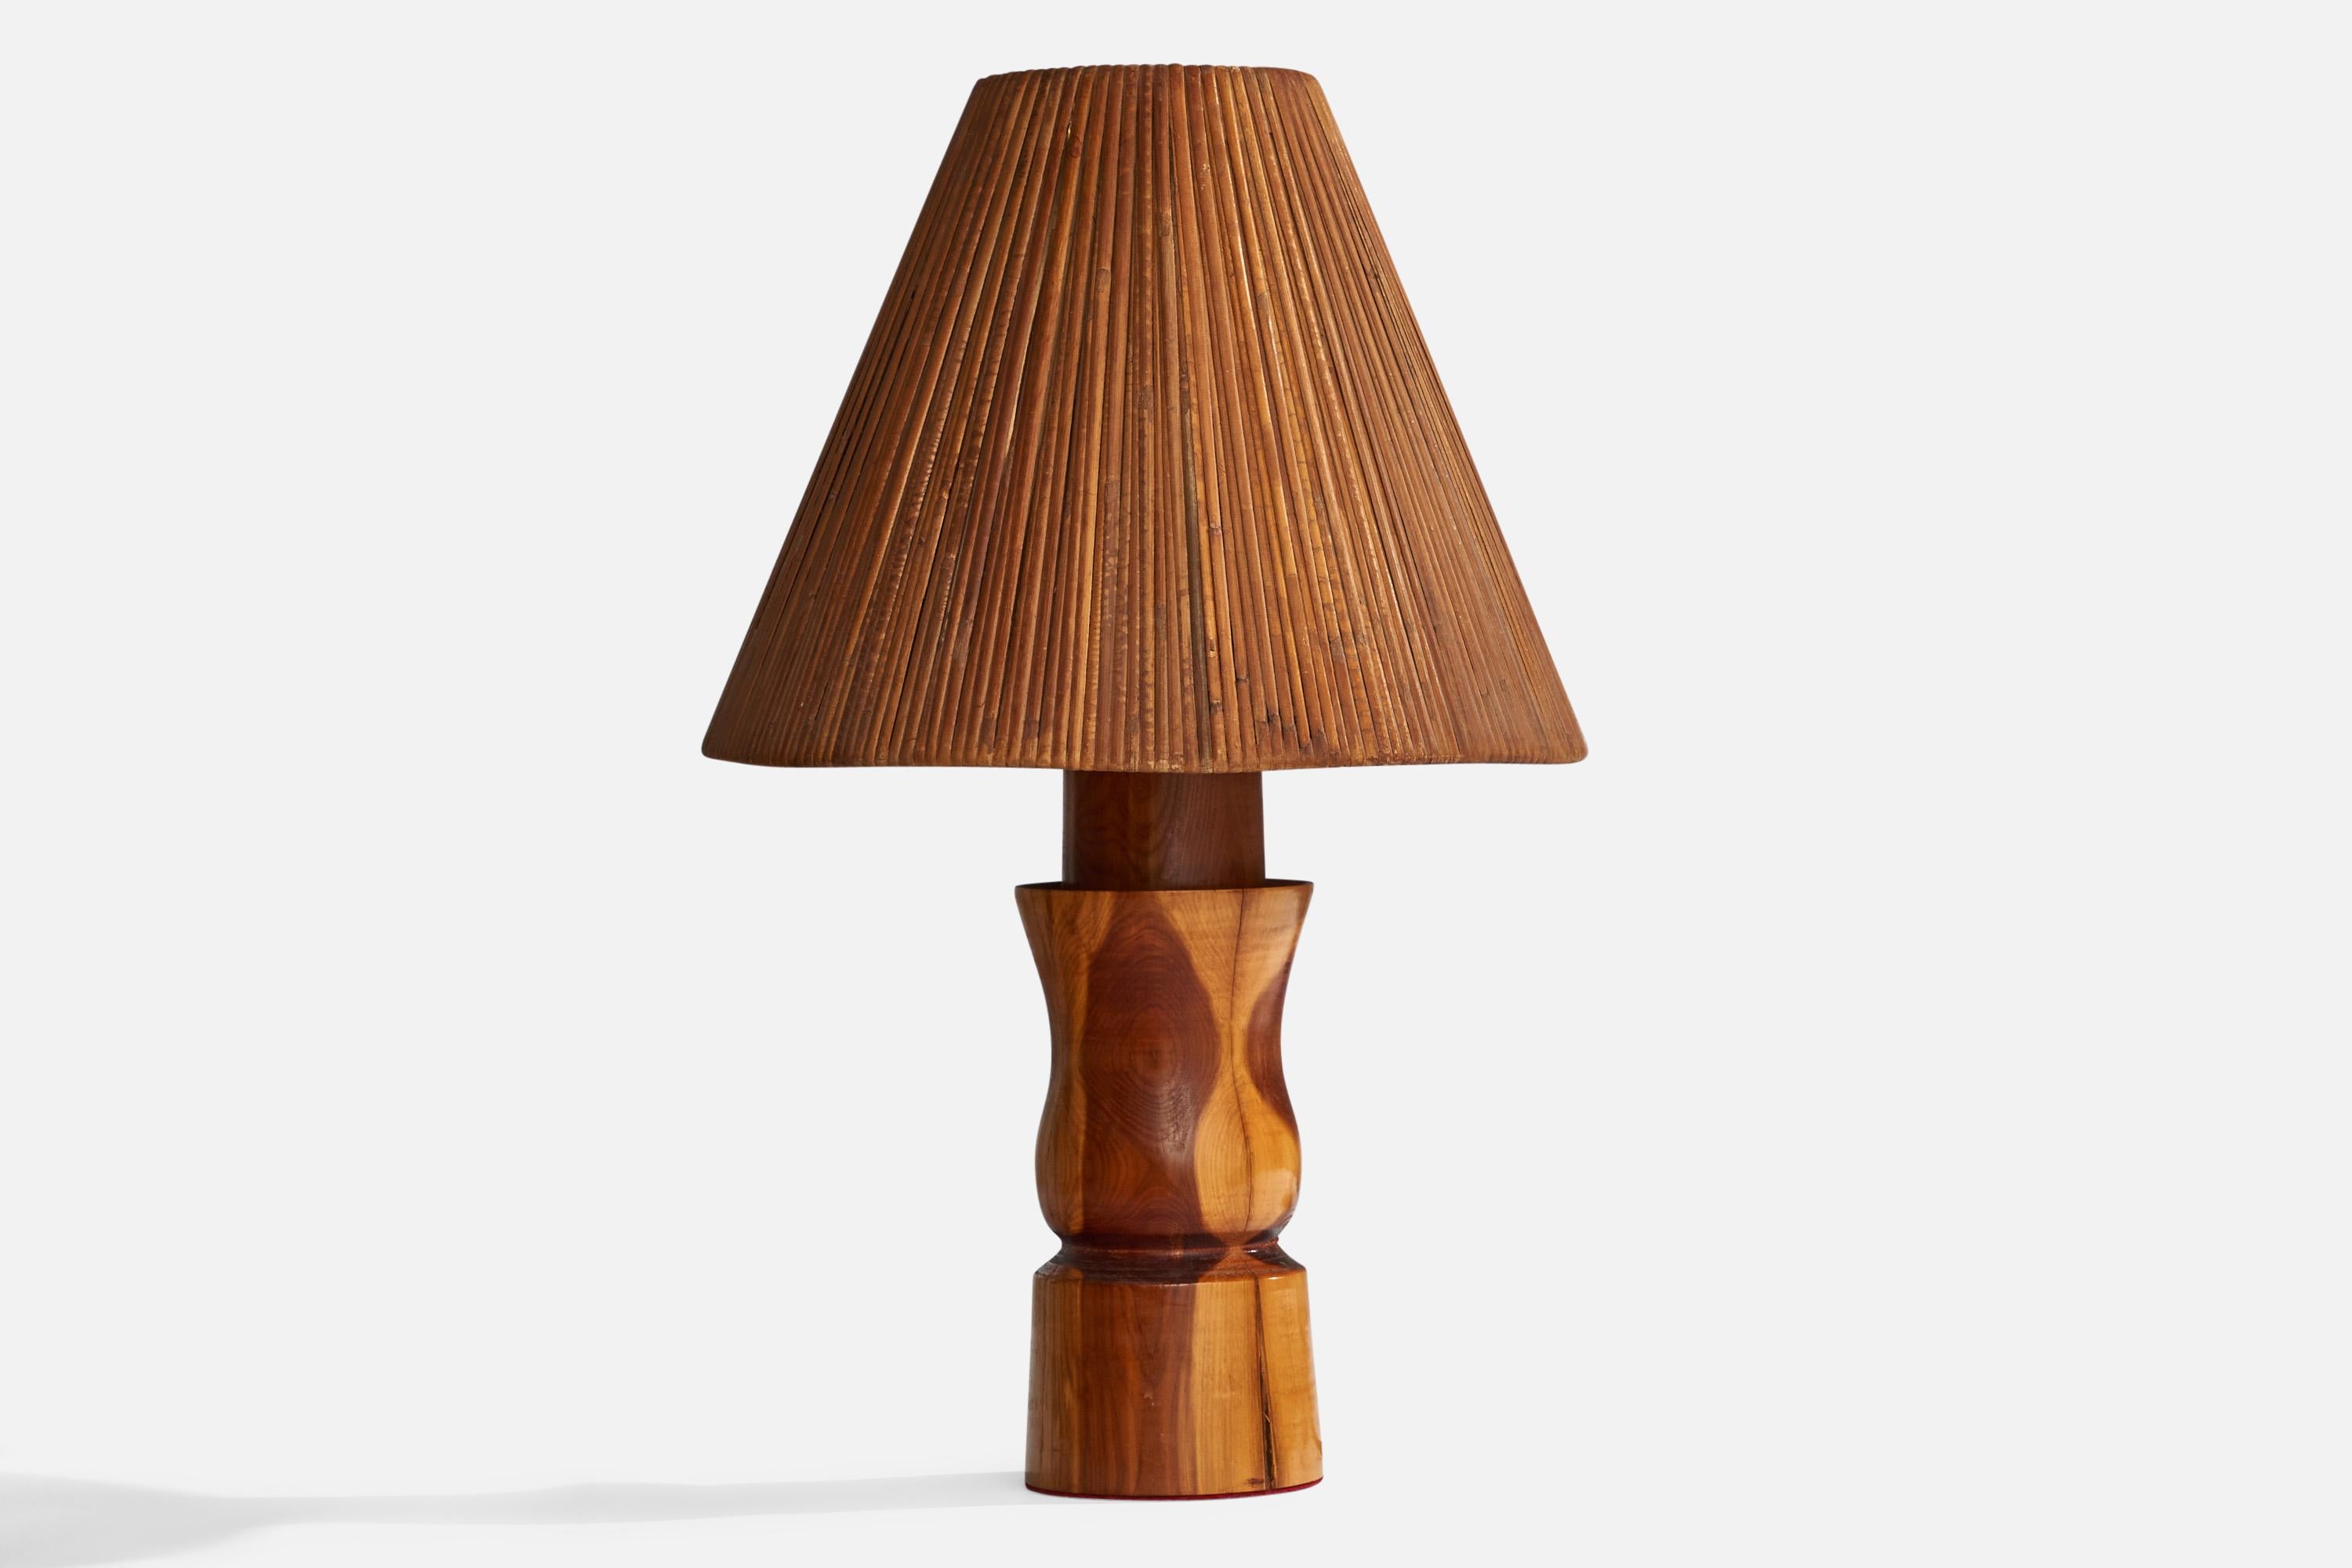 A hickory and rattan table lamp designed and produced in the US, 1950s.

Dimensions (inches): 19”  H x 13.25” W x 13.25” D
Stated dimensions include shade.
Bulb Specifications: E-26 Bulb
Number of Sockets: 1
All lighting will be converted for US